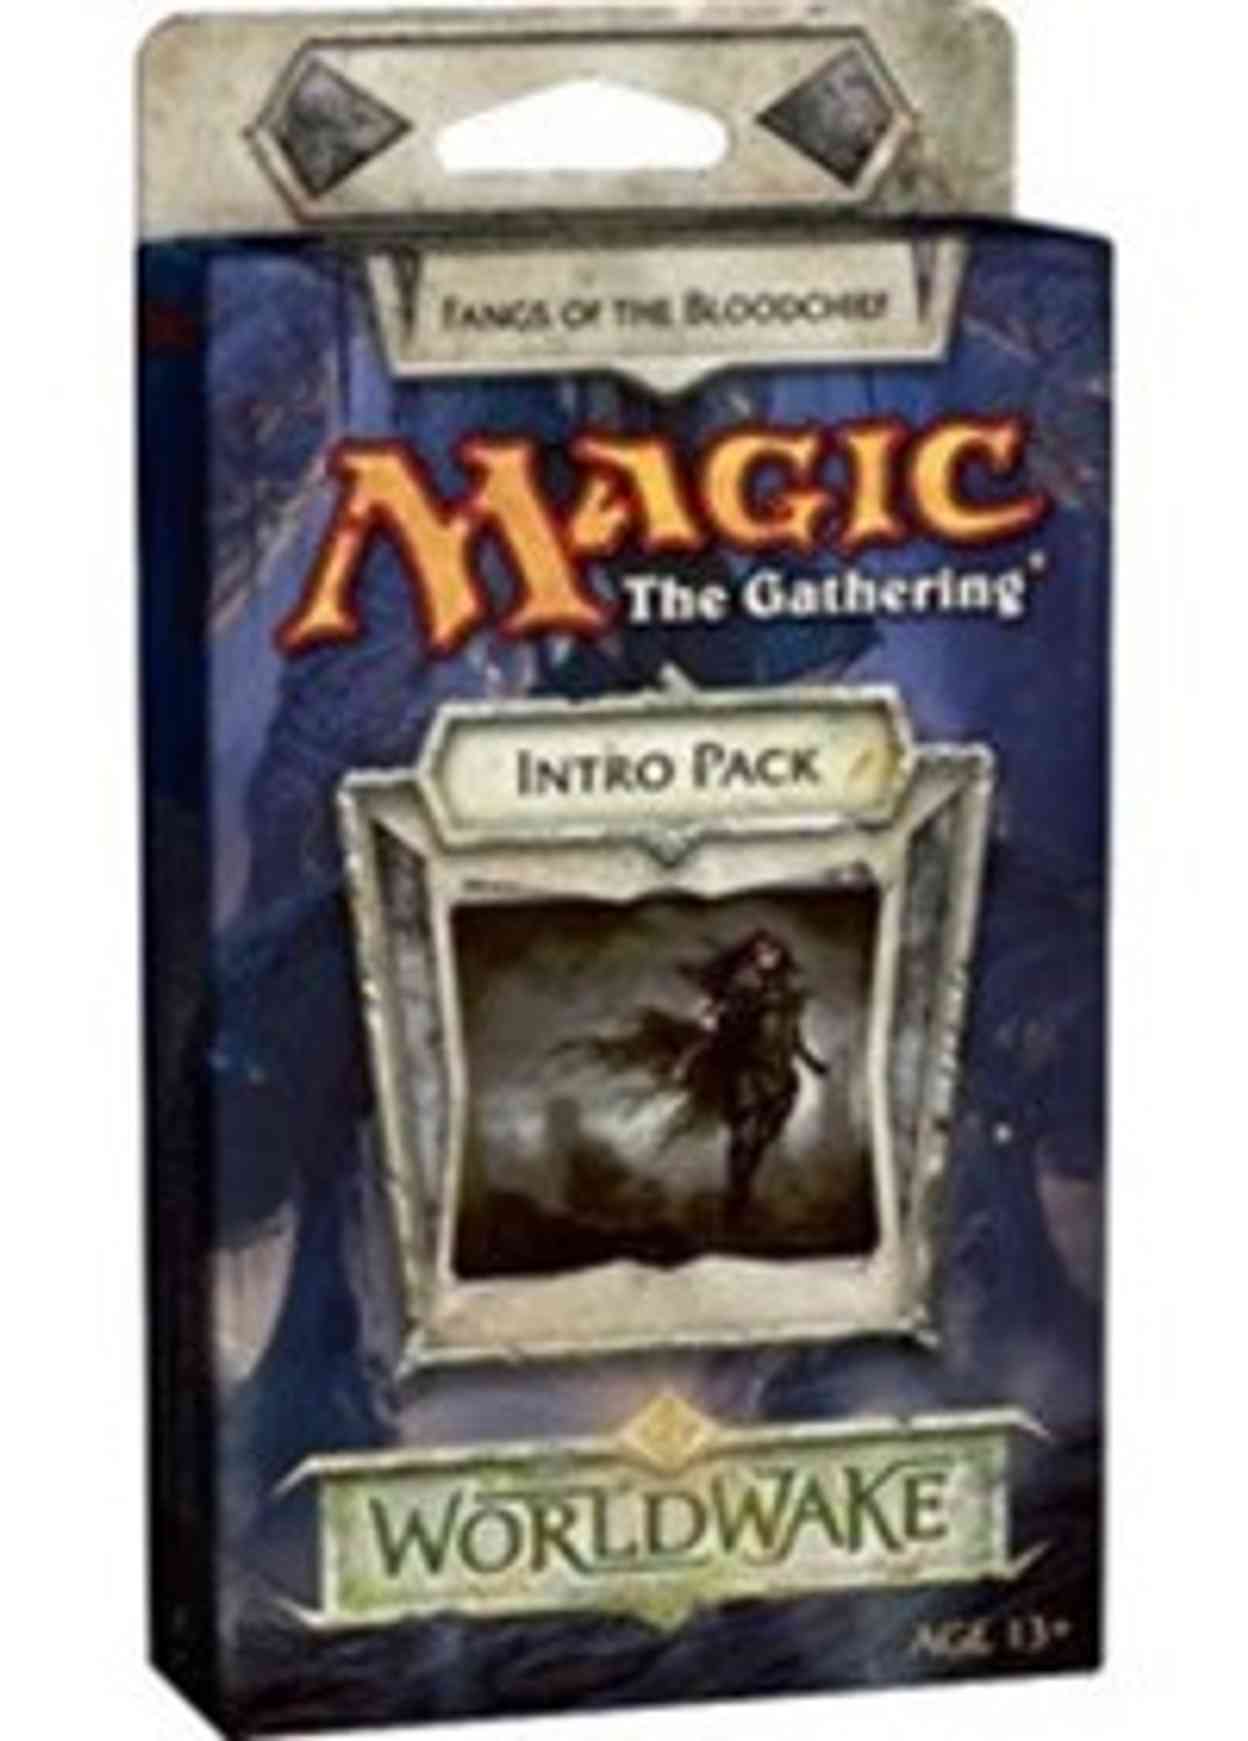 Worldwake Intro Pack - Fangs of the Bloodchief magic card front